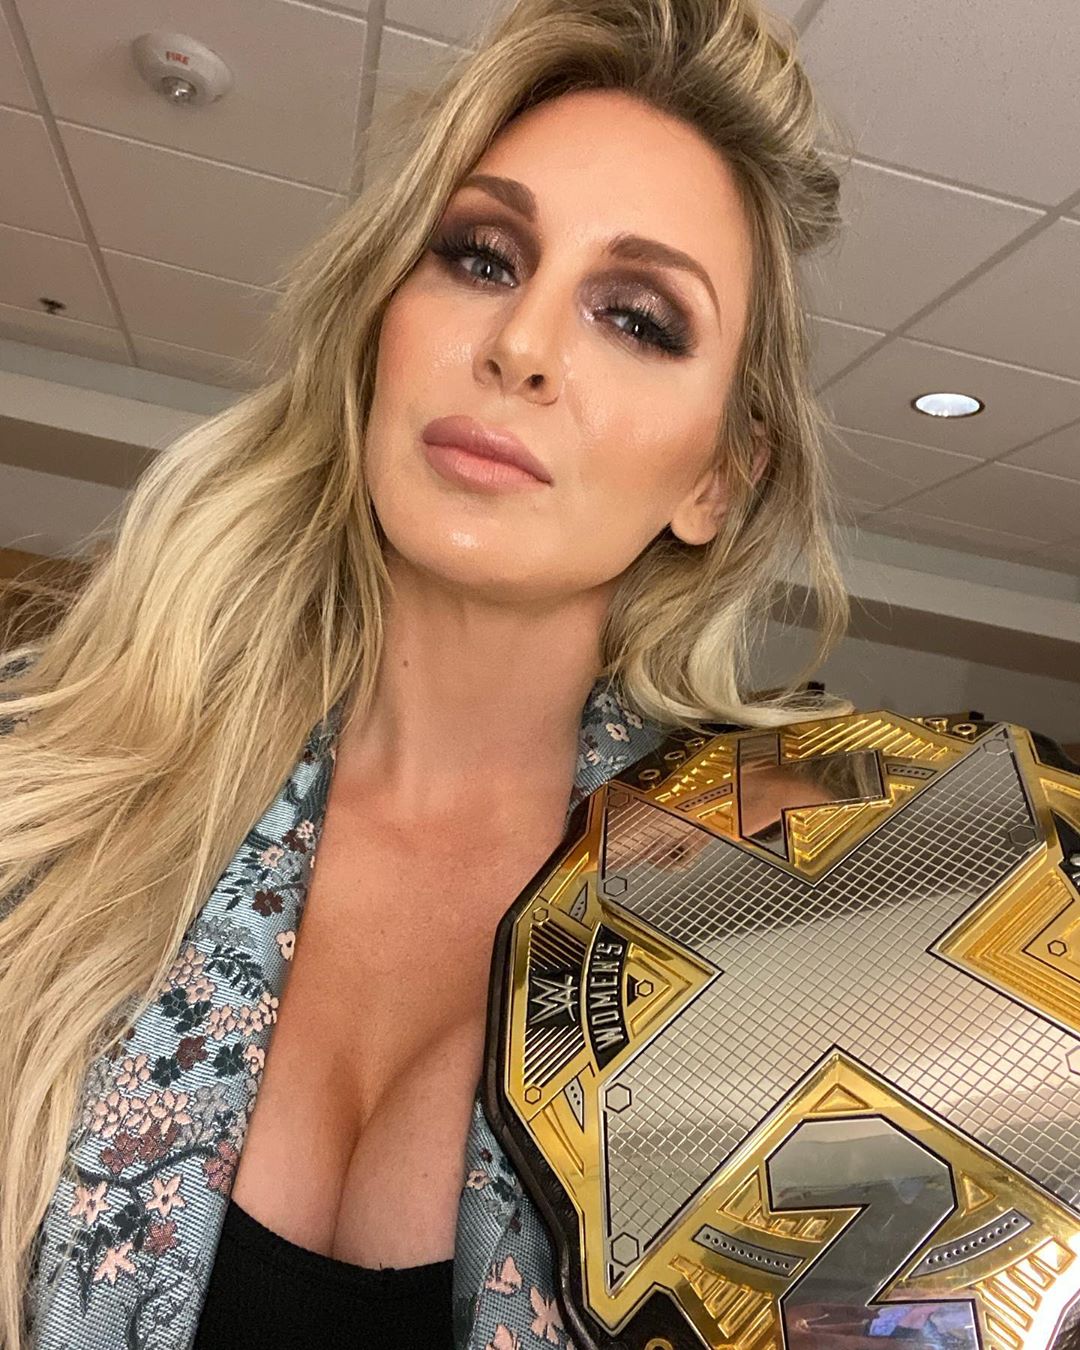 Charlotte Flair Suffered a Wardrobe Malfunction During Match With Ronda Rousey! - Photo 4